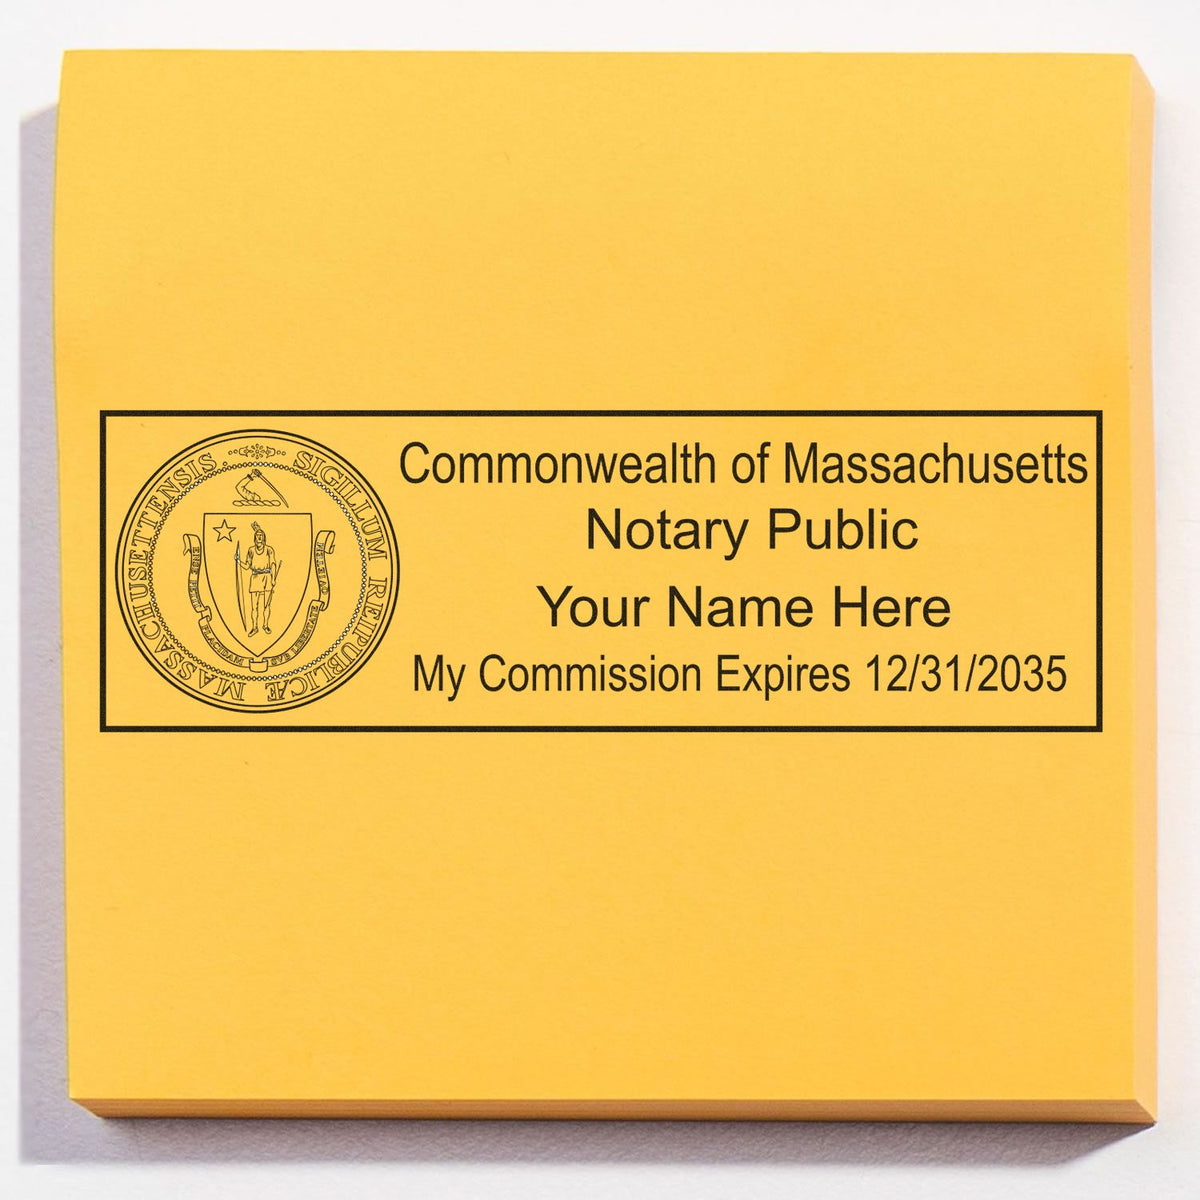 An alternative view of the PSI Massachusetts Notary Stamp stamped on a sheet of paper showing the image in use